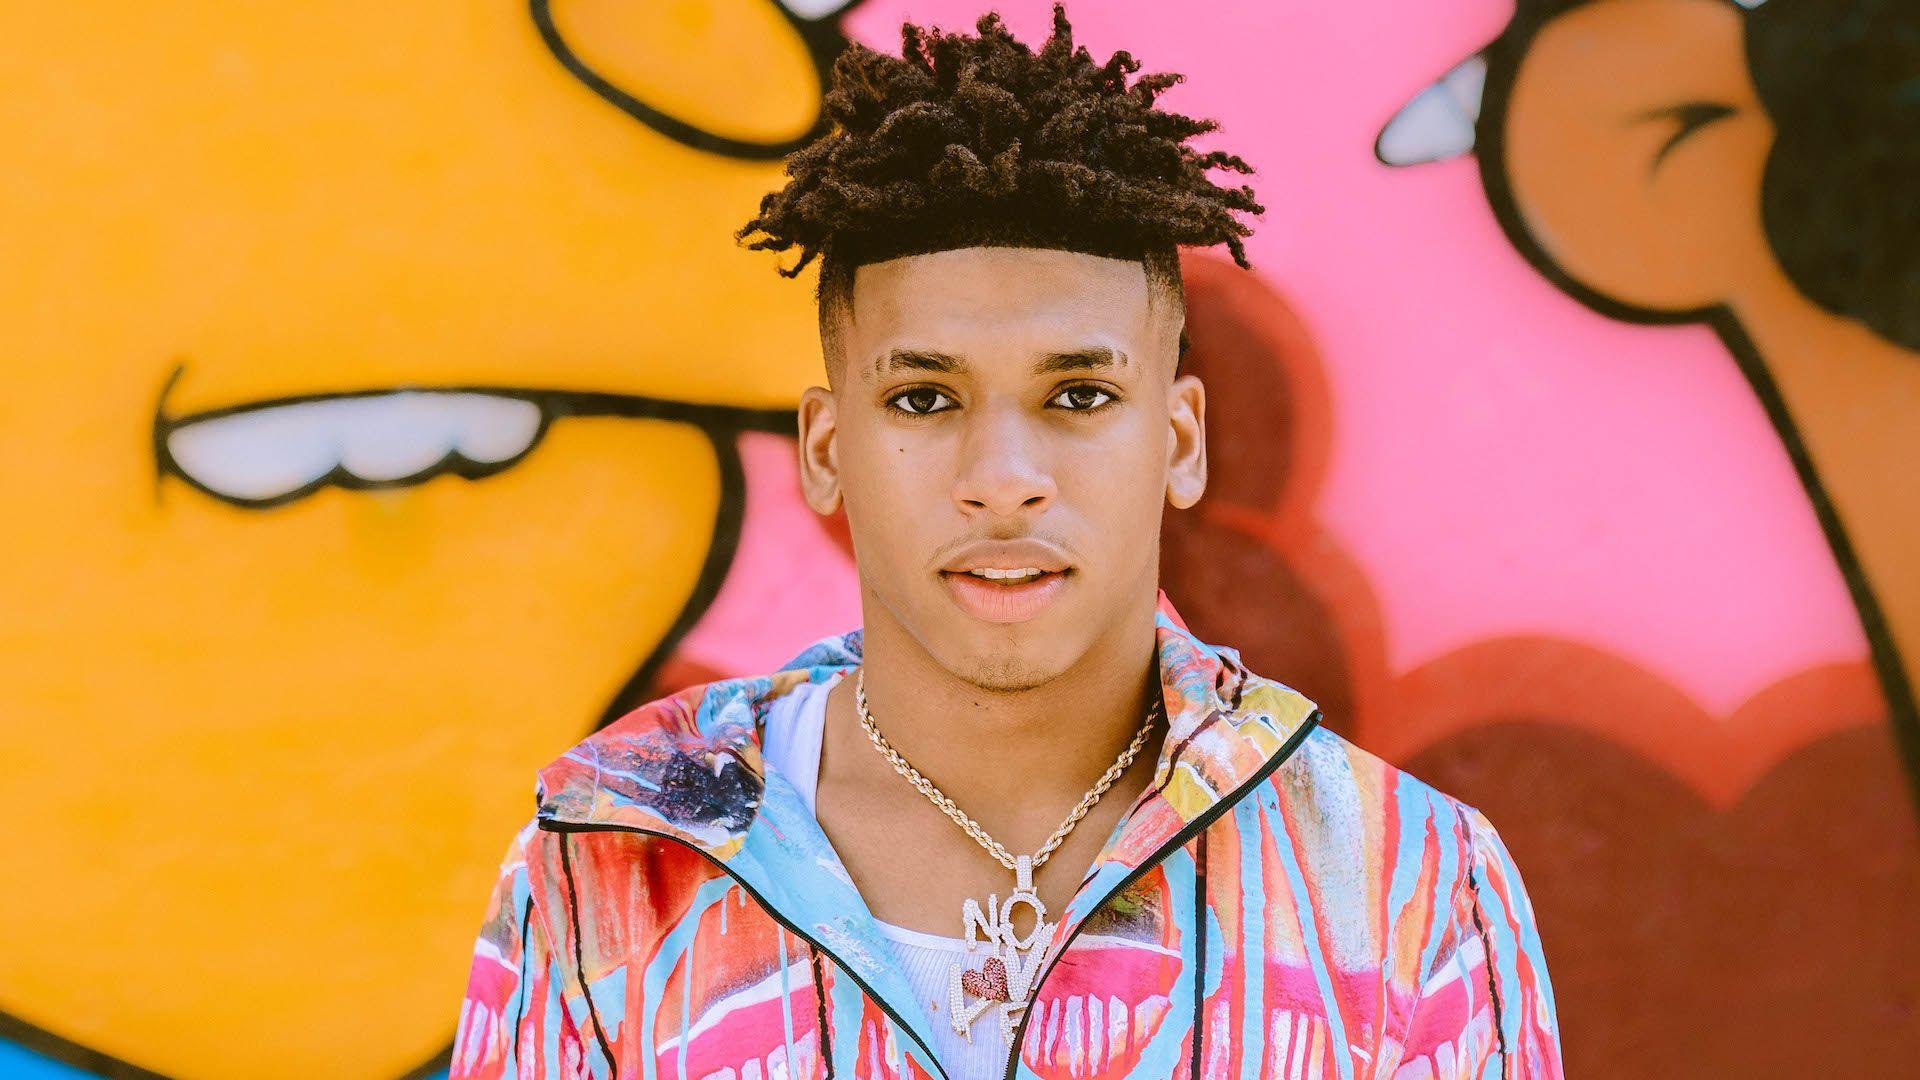 Meet NLE Choppa, the Memphis Prodigy With the Shotta Flow